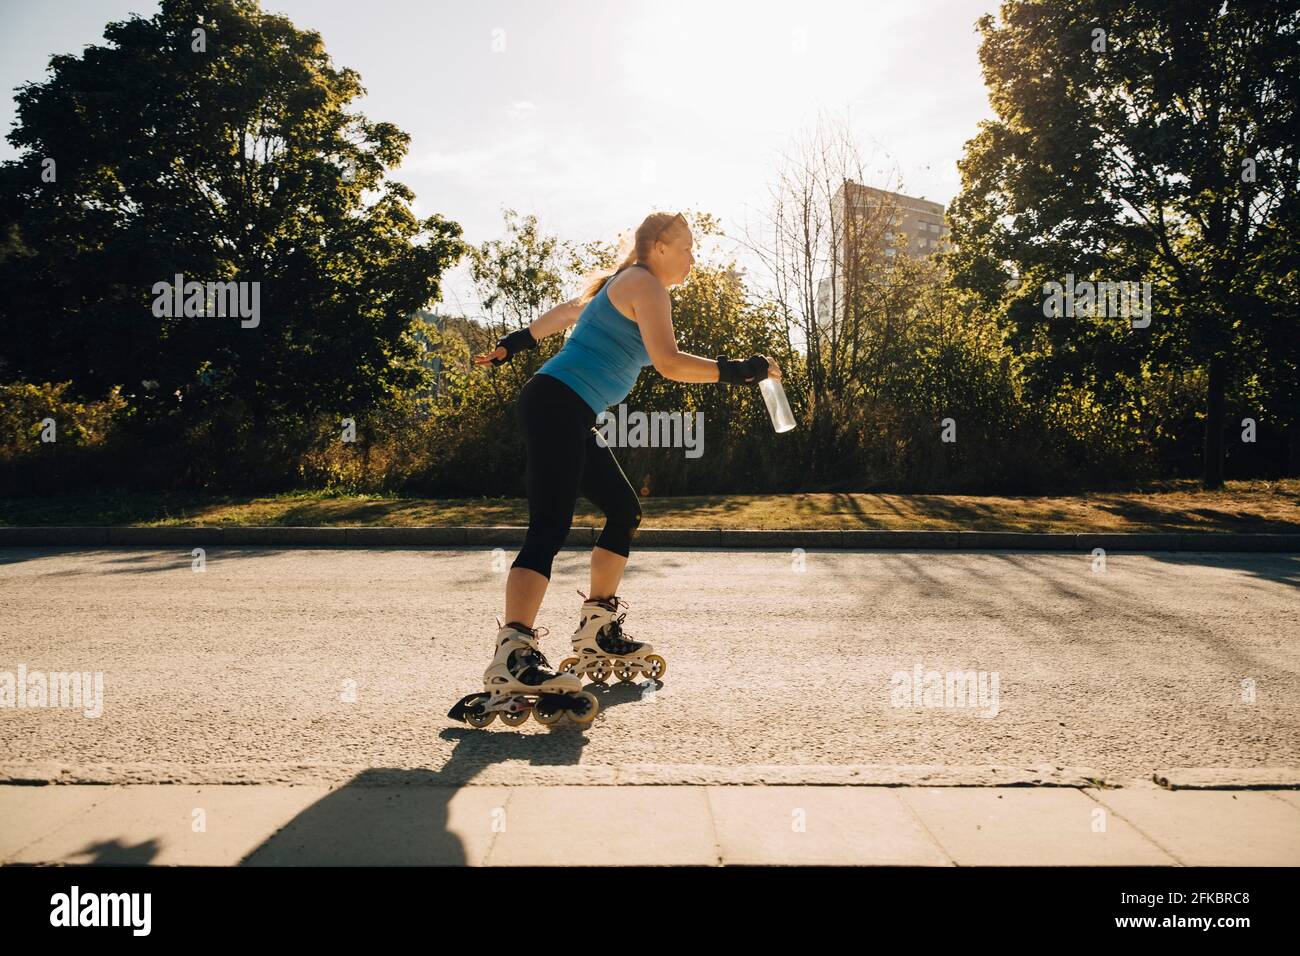 Female athlete roller skating on street during sunny day Stock Photo